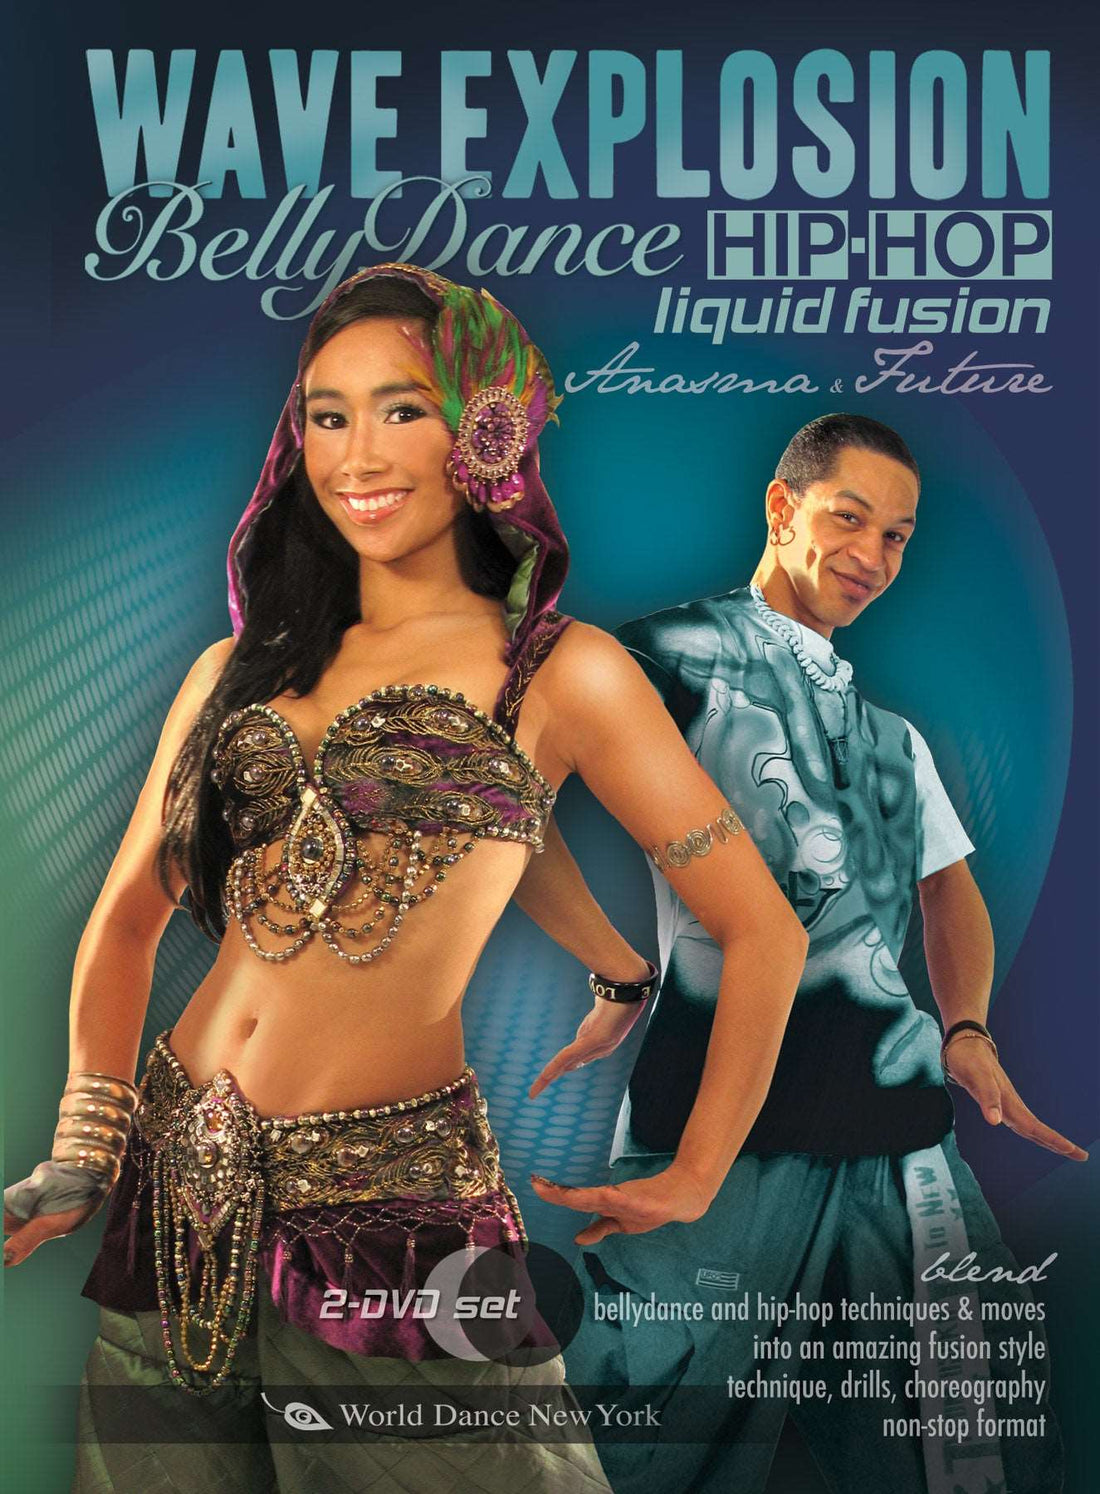 Wave Explosion: Belly Dance - Hip-Hop Liquid Fusion with Anasma - INSTANT VIDEO / DVD - World Dance New York